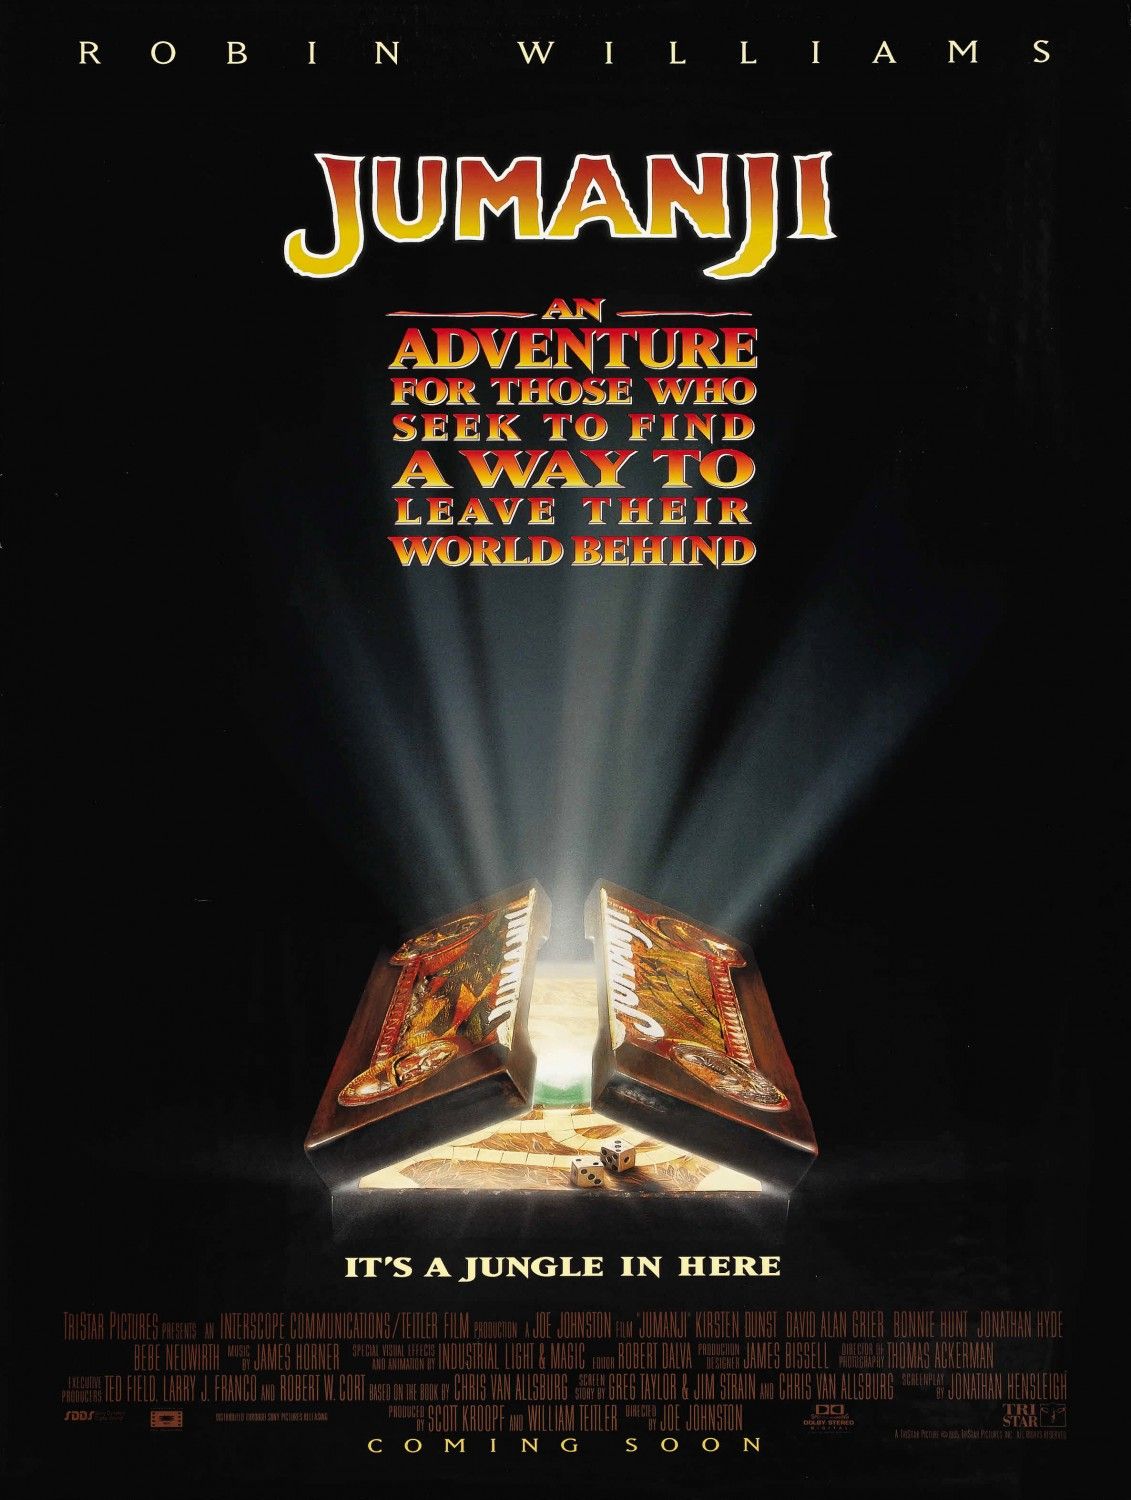 We’ll Never Have Another Movie Like 1995’s ‘Jumanji’